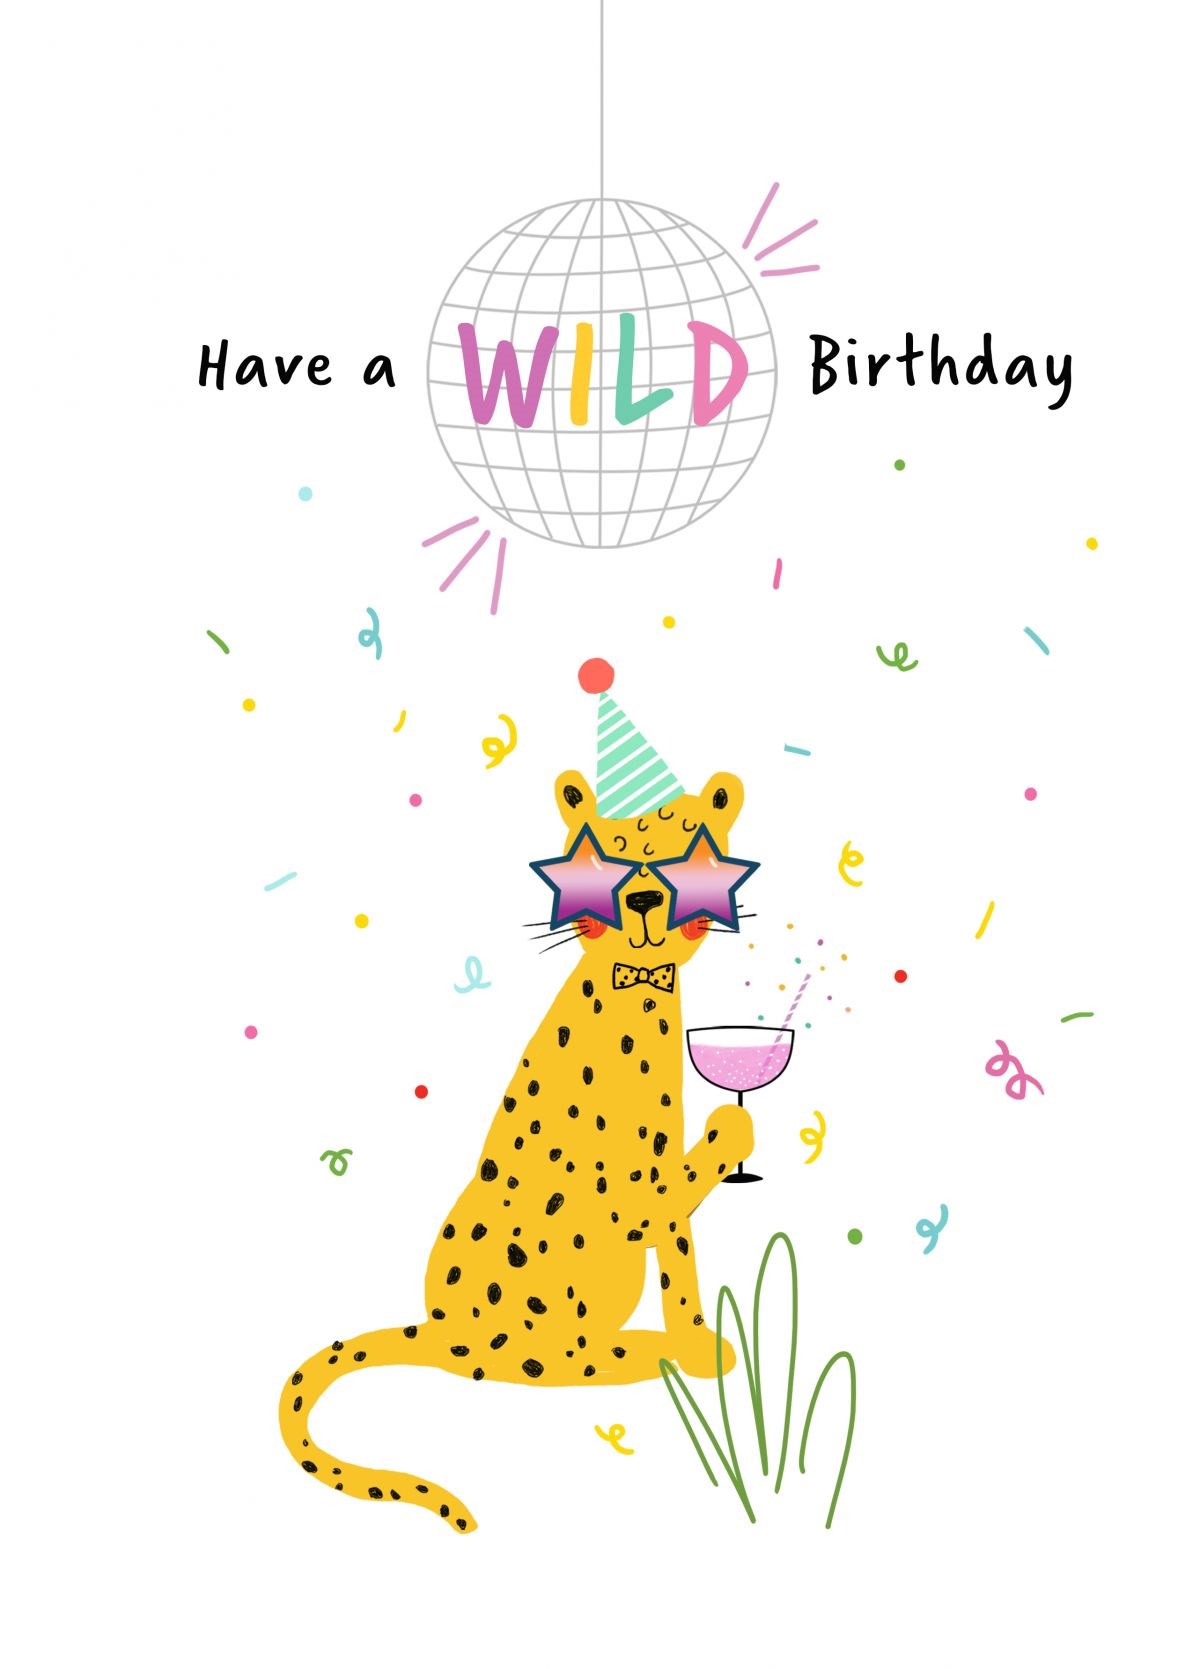 Friend Birthday Card Quarantine Birthday Lockdown Birthday Card There Gin Spirit Funny Birthday Card for her Thoughtful and Sympathy Card A6 Small Thank You Card Social distancing Sign 